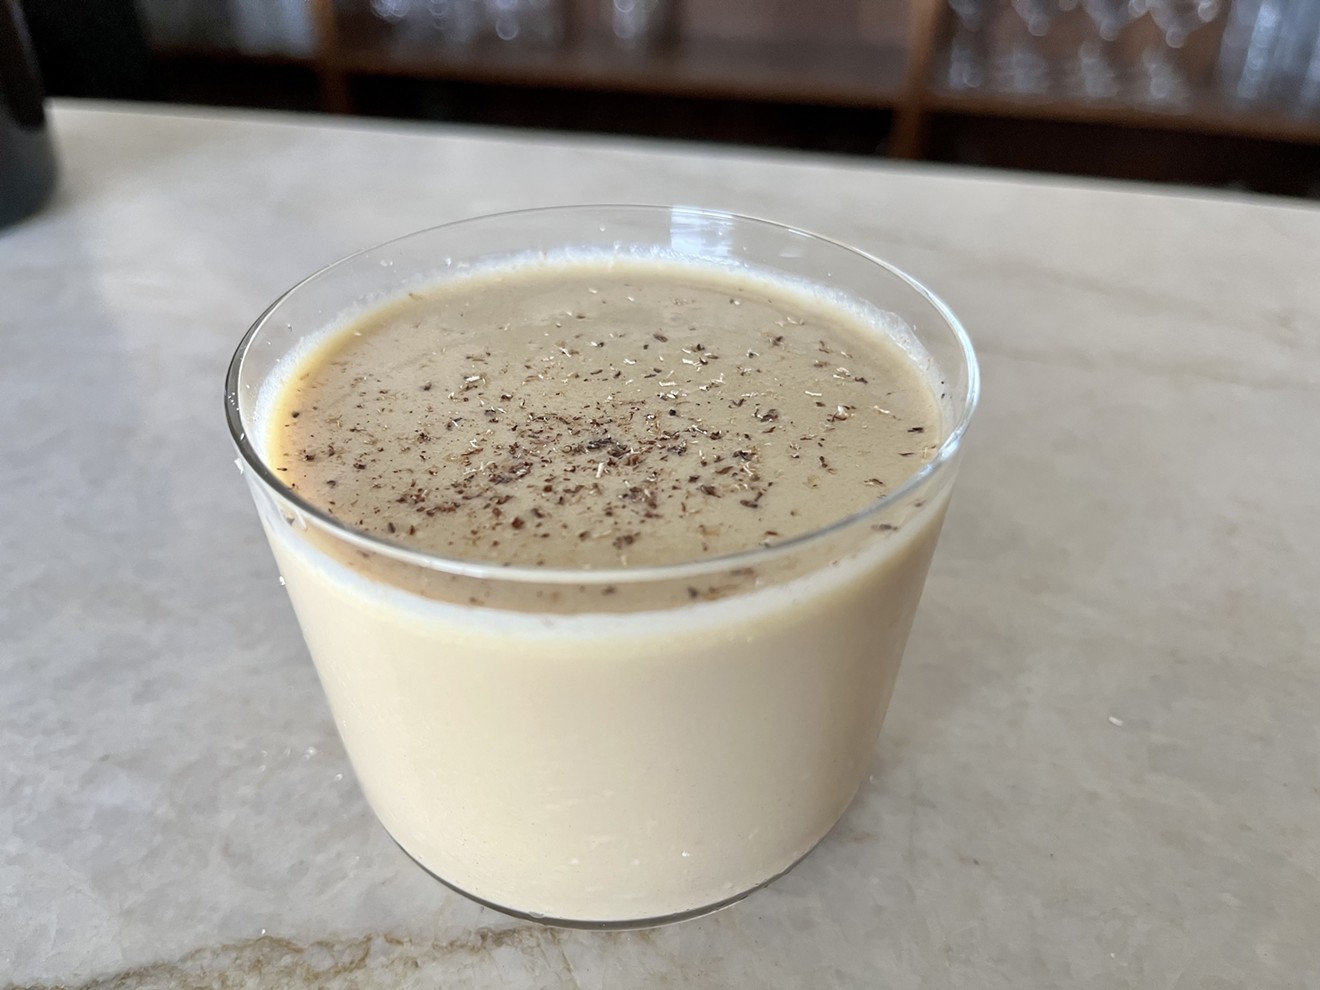 Valentine’s eggnog is made with 12 ingredients, including five different spirits, homemade Mexican vanilla extract and local cream and eggs. Every glass gets a dusting of freshly-grated nutmeg before getting served.